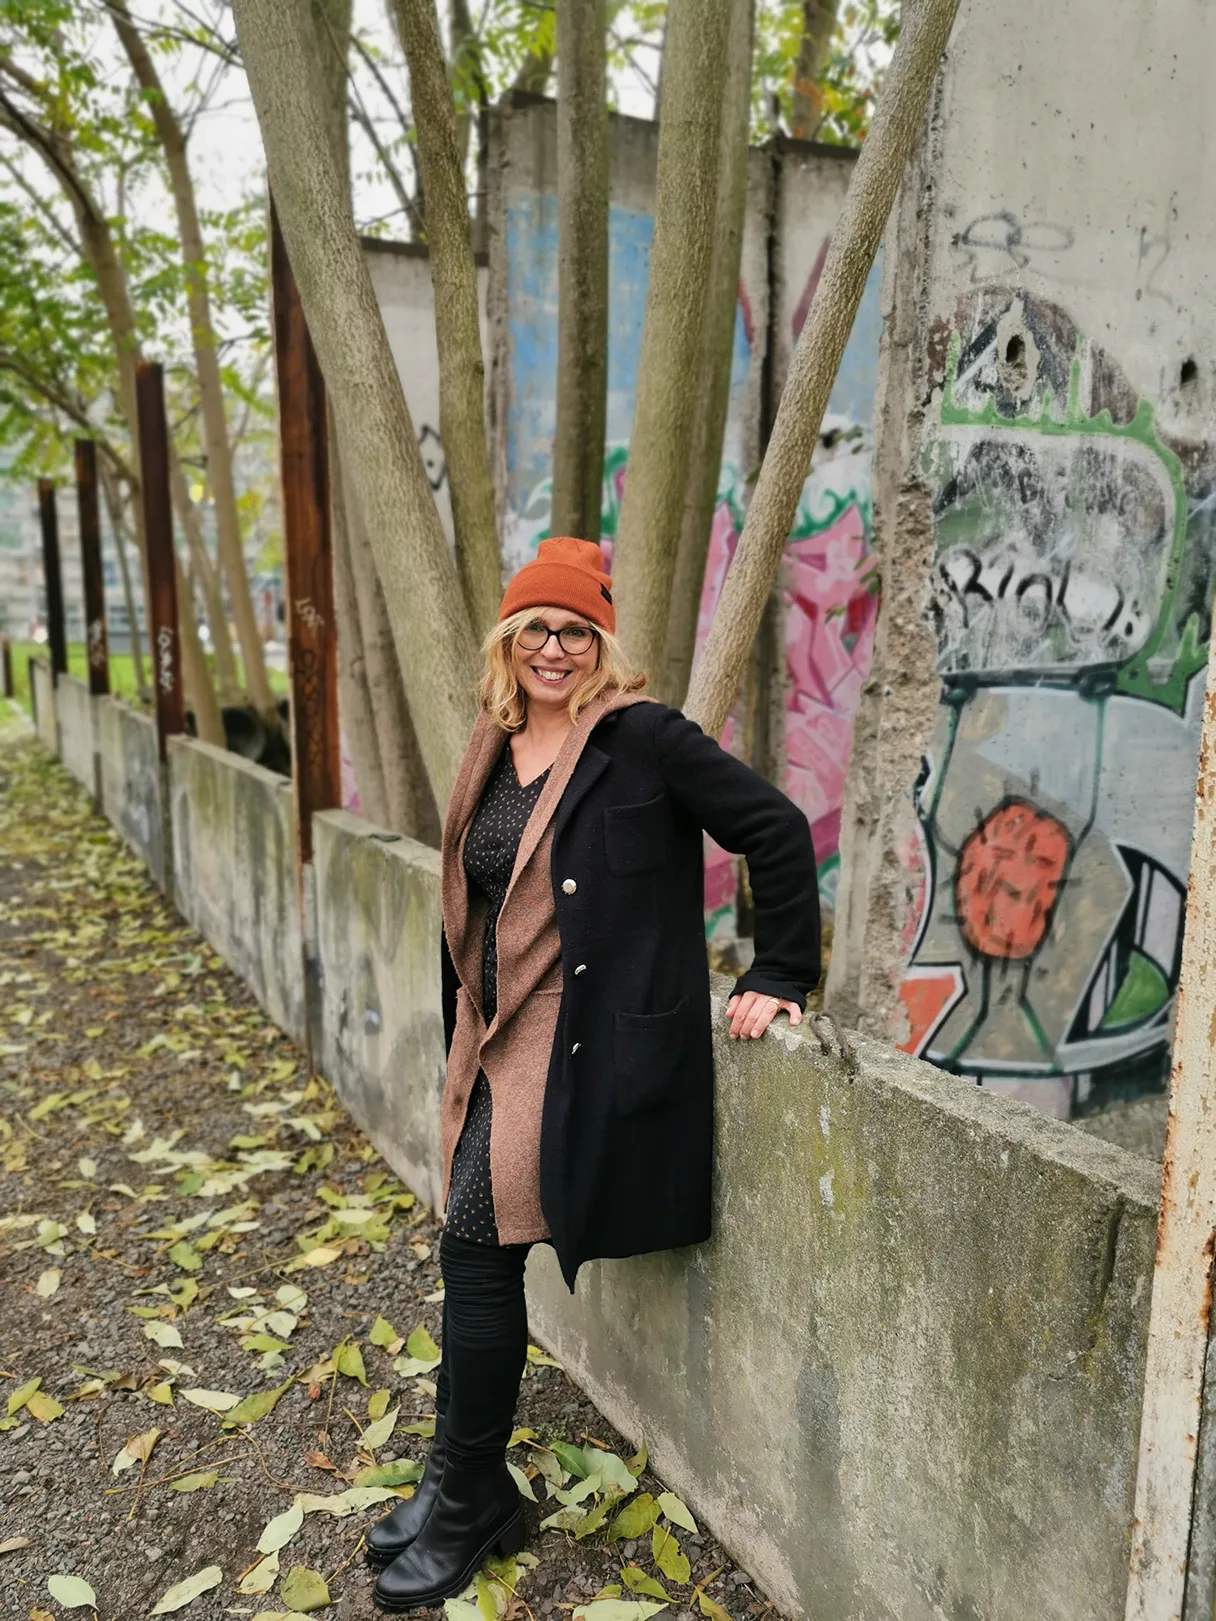 Birigit L., Berlin Wall, Birgit leans against a piece of the wall and smiles into the camera